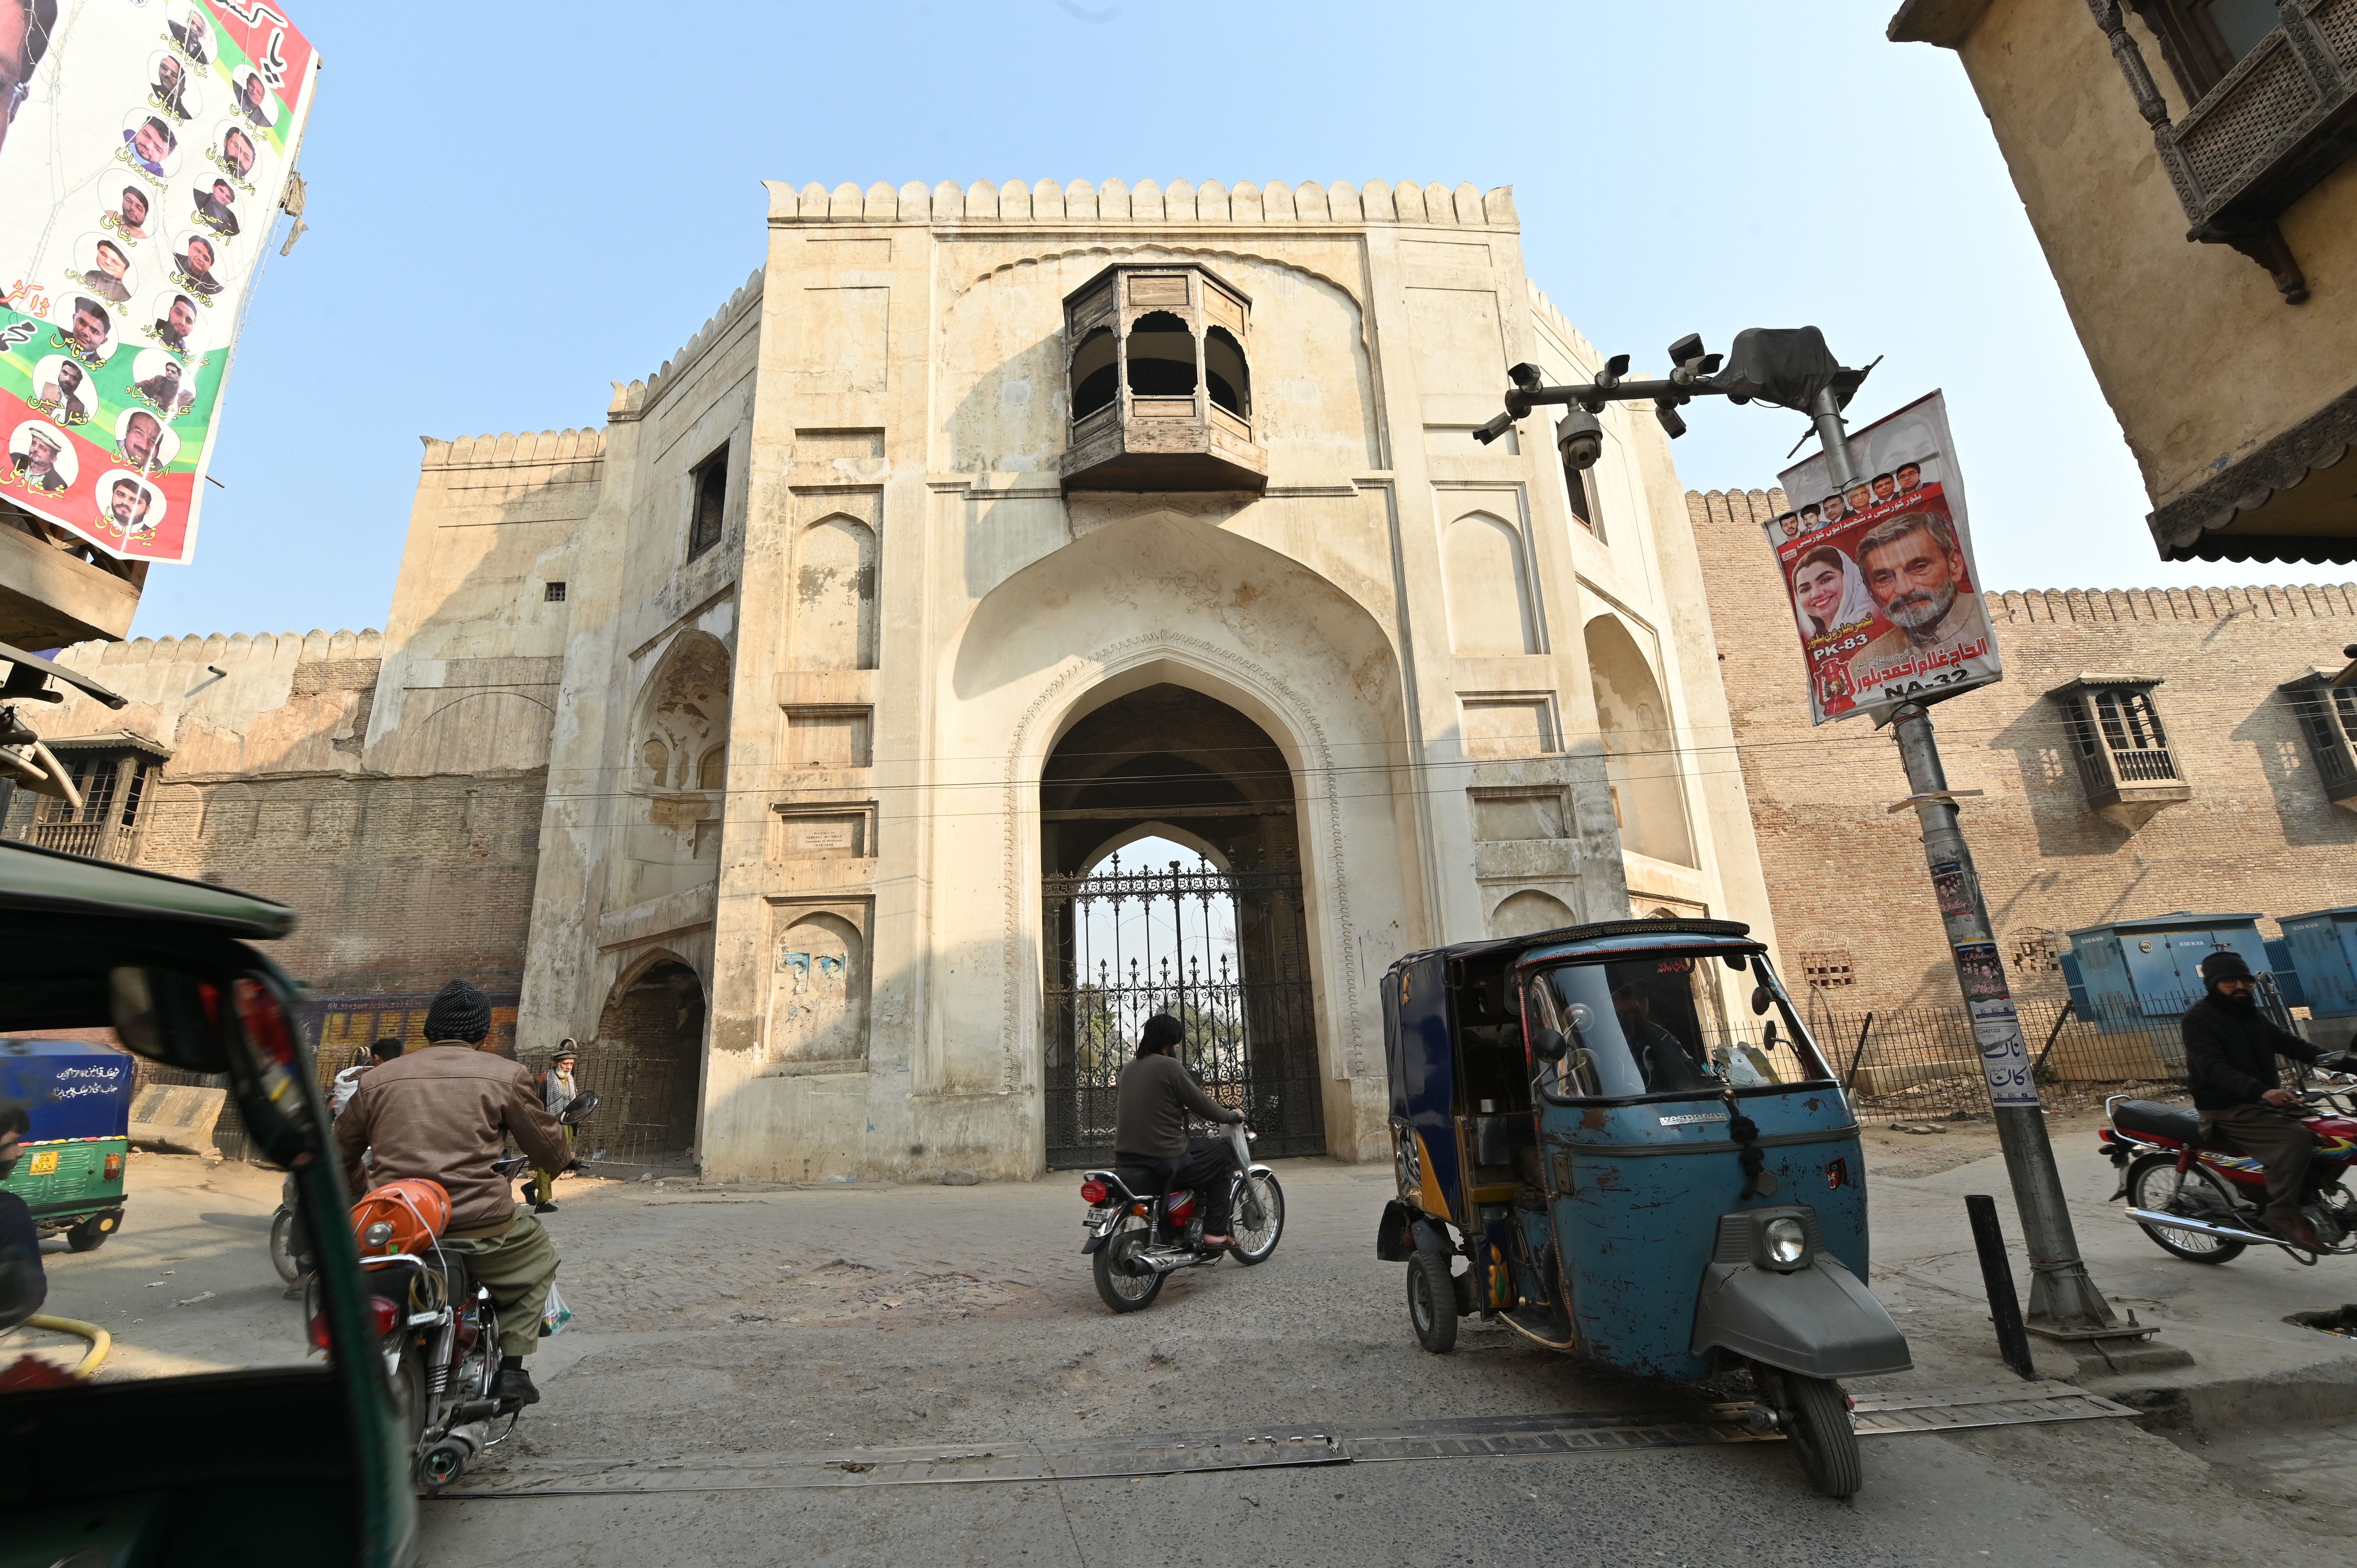 The Westeren gate of Gor Khatri,  also known as Avitabile pavilion since he converted the site into the residence and official headquarters